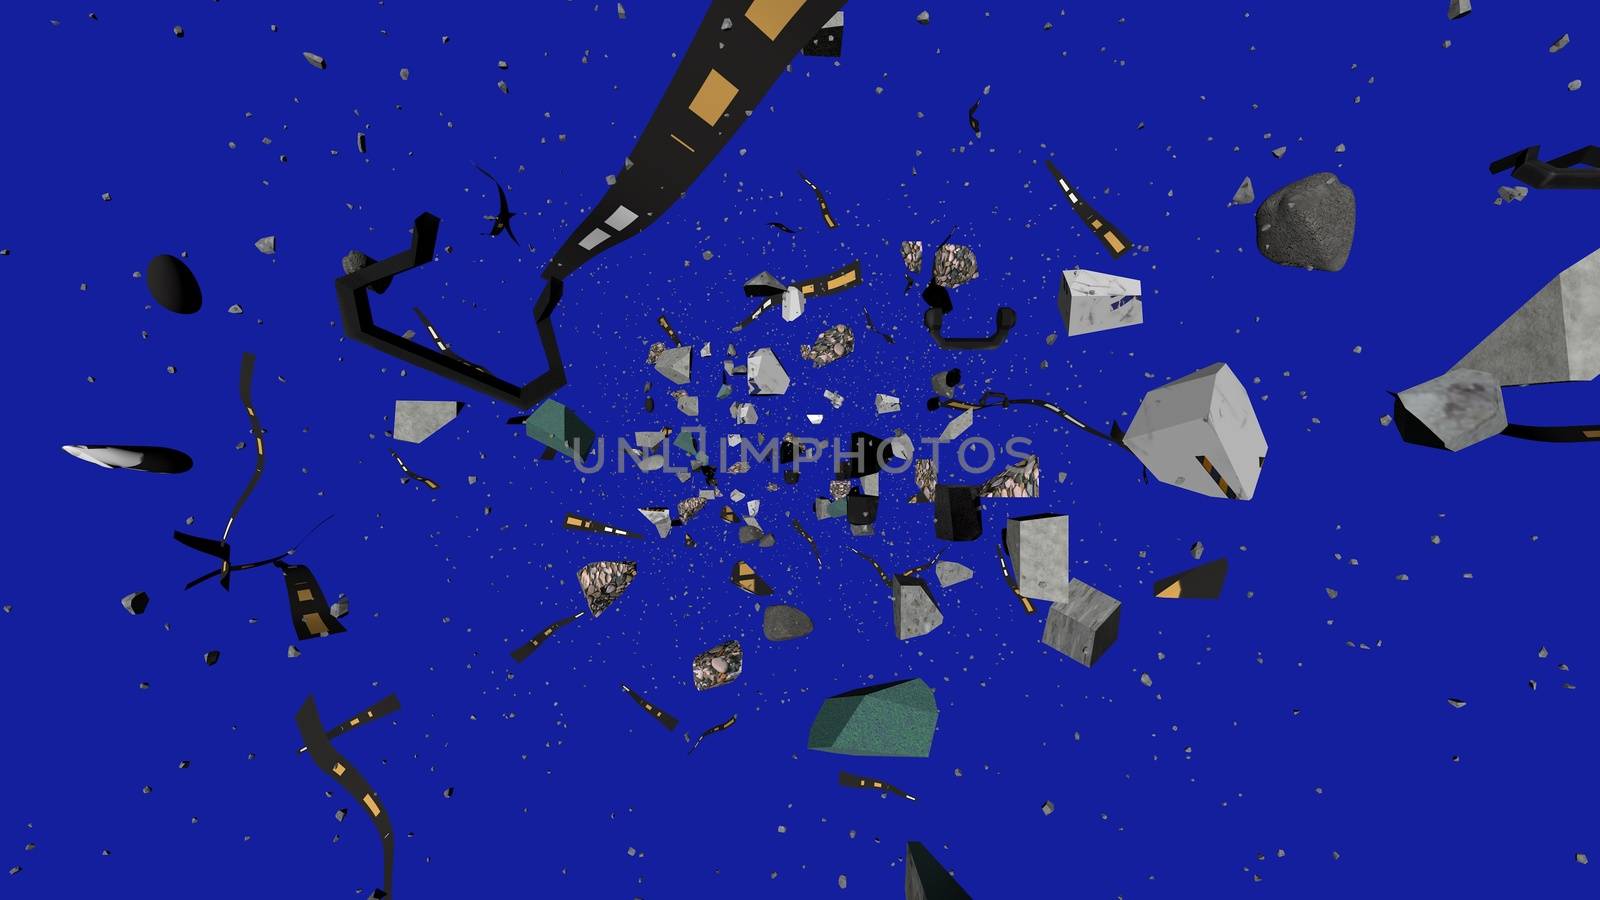 Volumetric 3d illustration of some wreckage from stones and reels with stripes tumbling in the dark blue Universe. It looks dramatic and striking